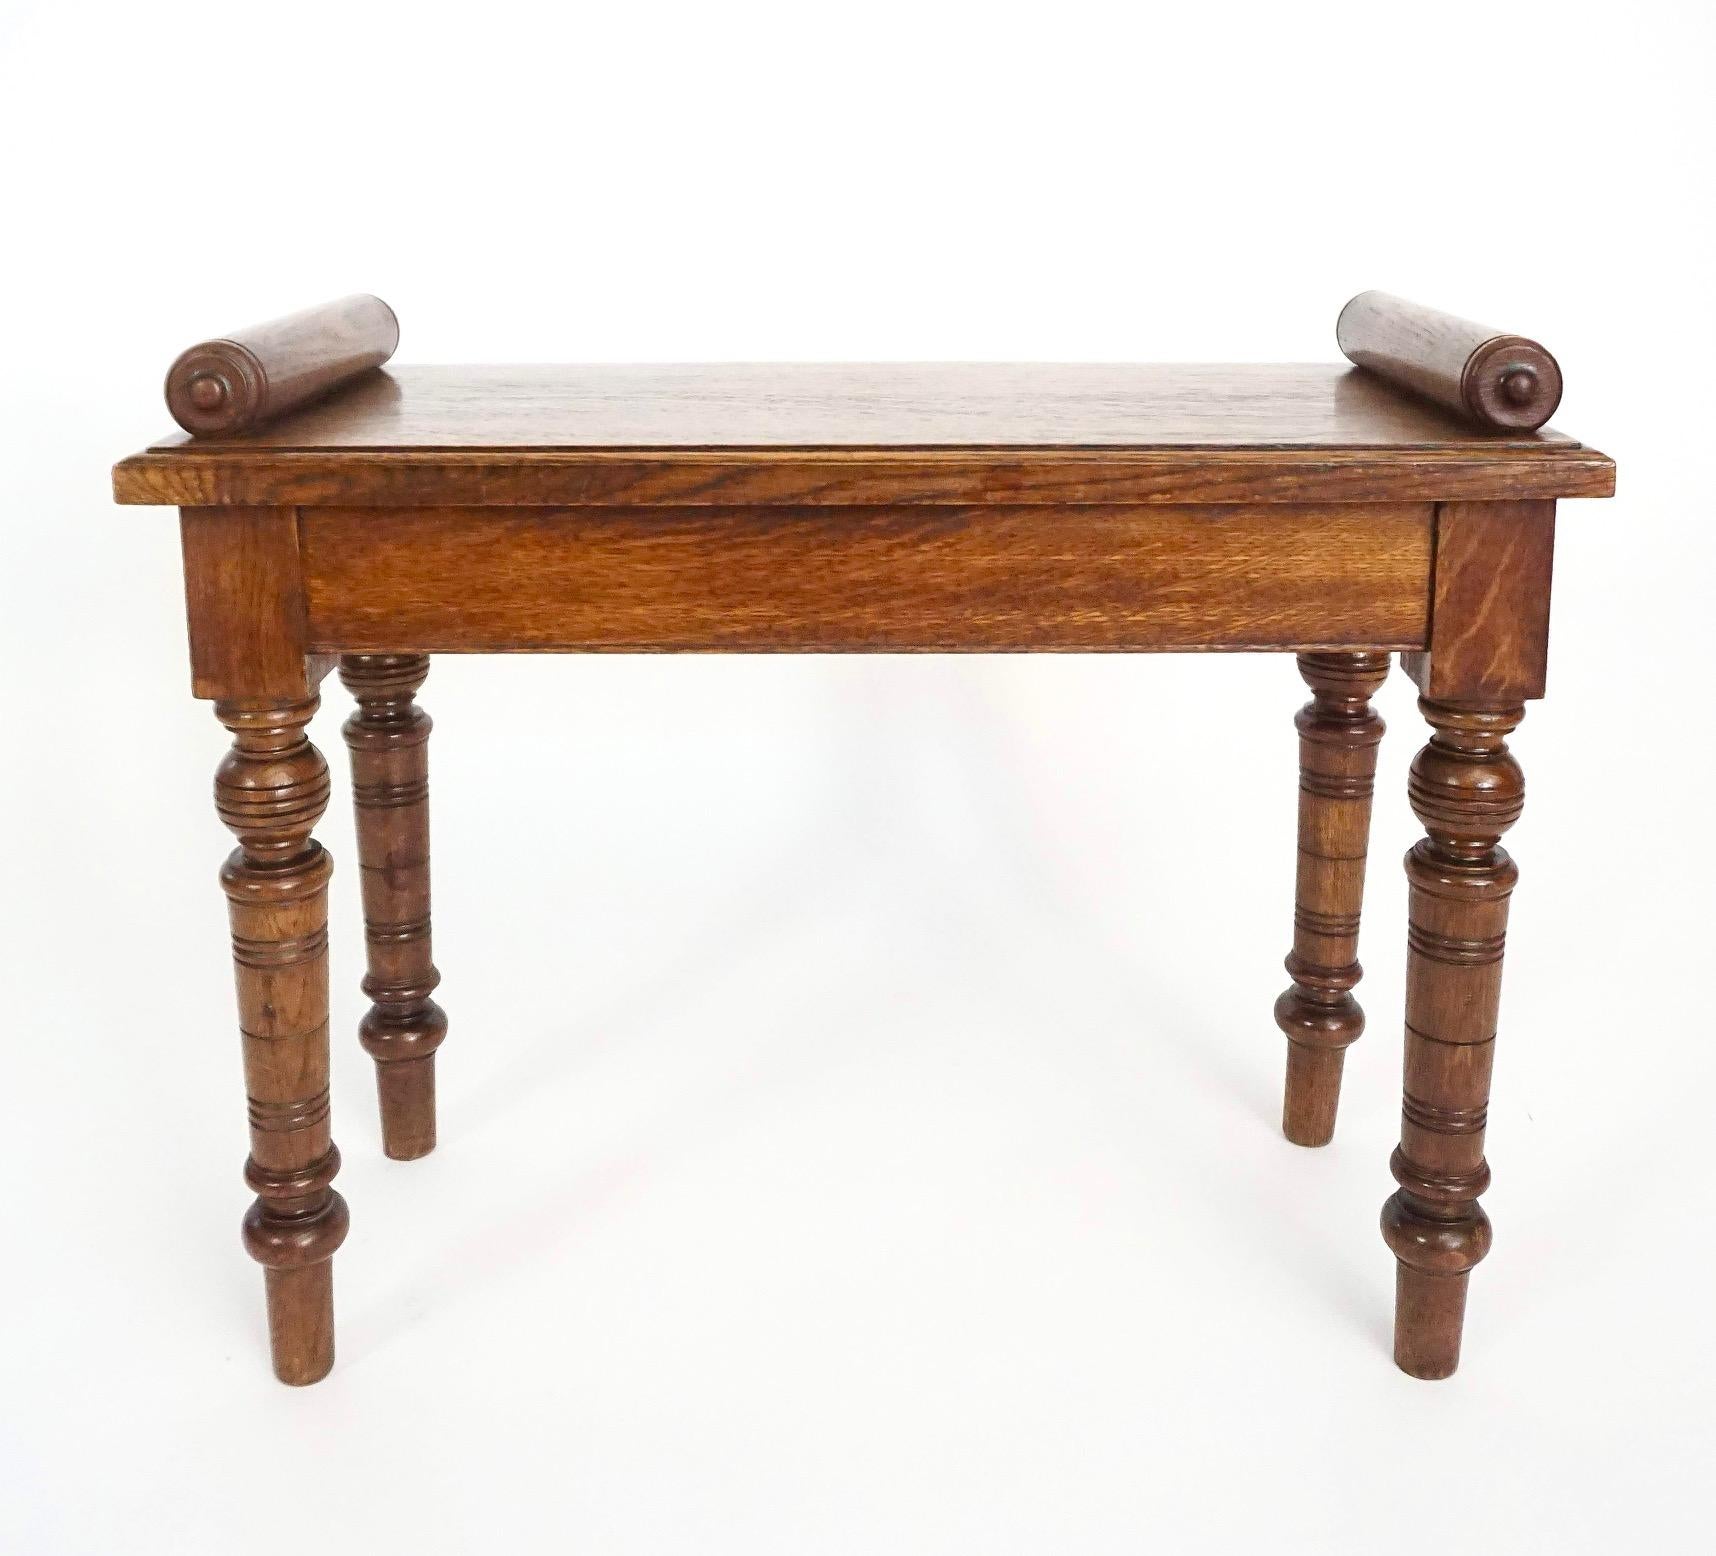 A circa 1880 English aesthetic movement solid oak hall bench or window seat of rare single seat form attributed to James Shoolbred & Co. of London, the rectangular molded-edge top with turned cylindrical bolsters each end above flat friezes joining